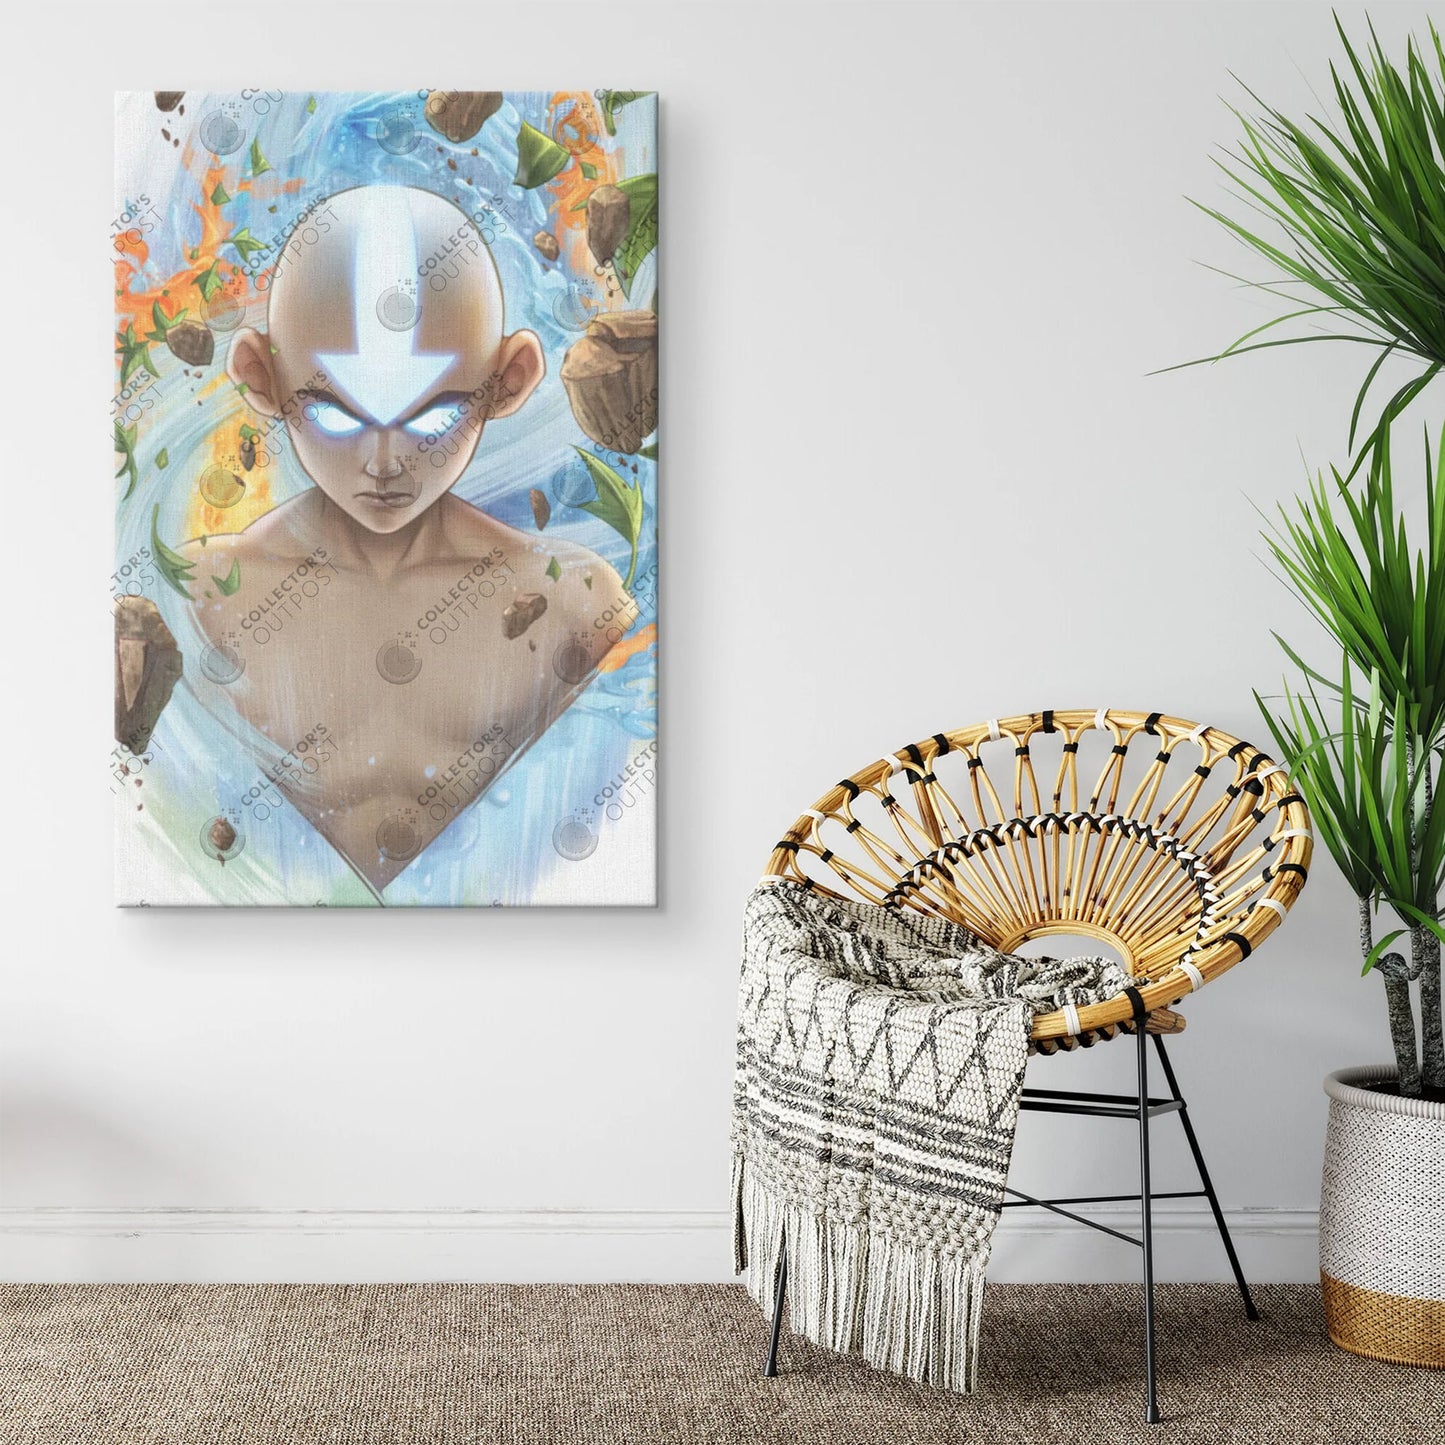 Aang in the Avatar State (Avatar: The Last Airbender) Legacy Portrait Art Print